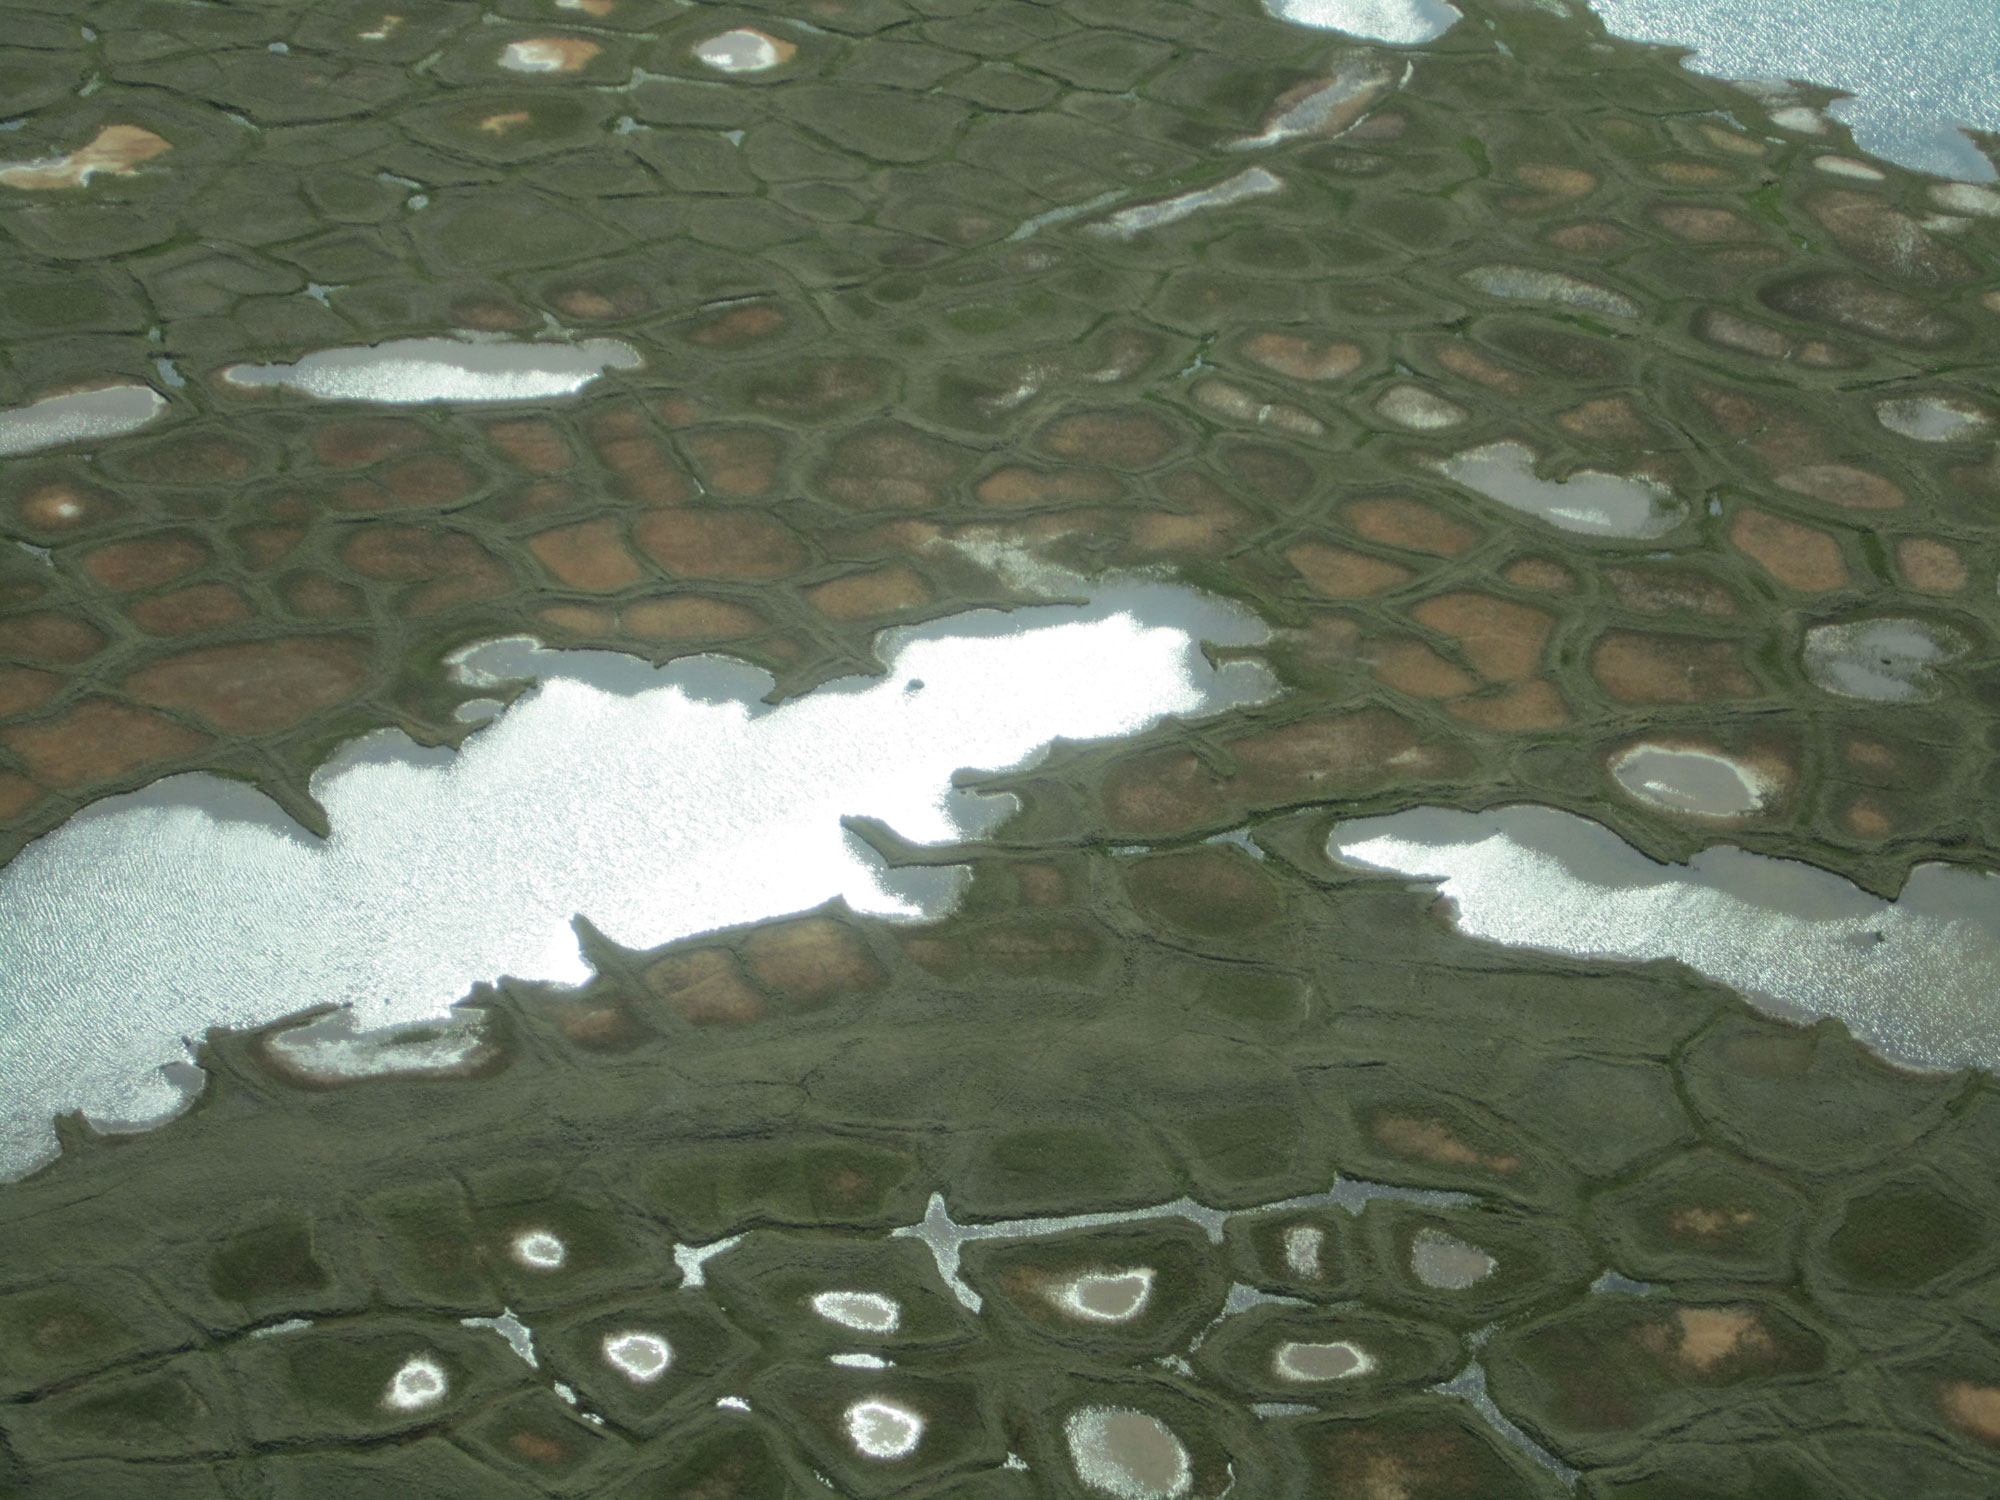 Photograph of thawing ice wedges in Arctic Alaska. The photo shows a green landscape broken up into polygons. Standing water occurs among and within some of the polygons.